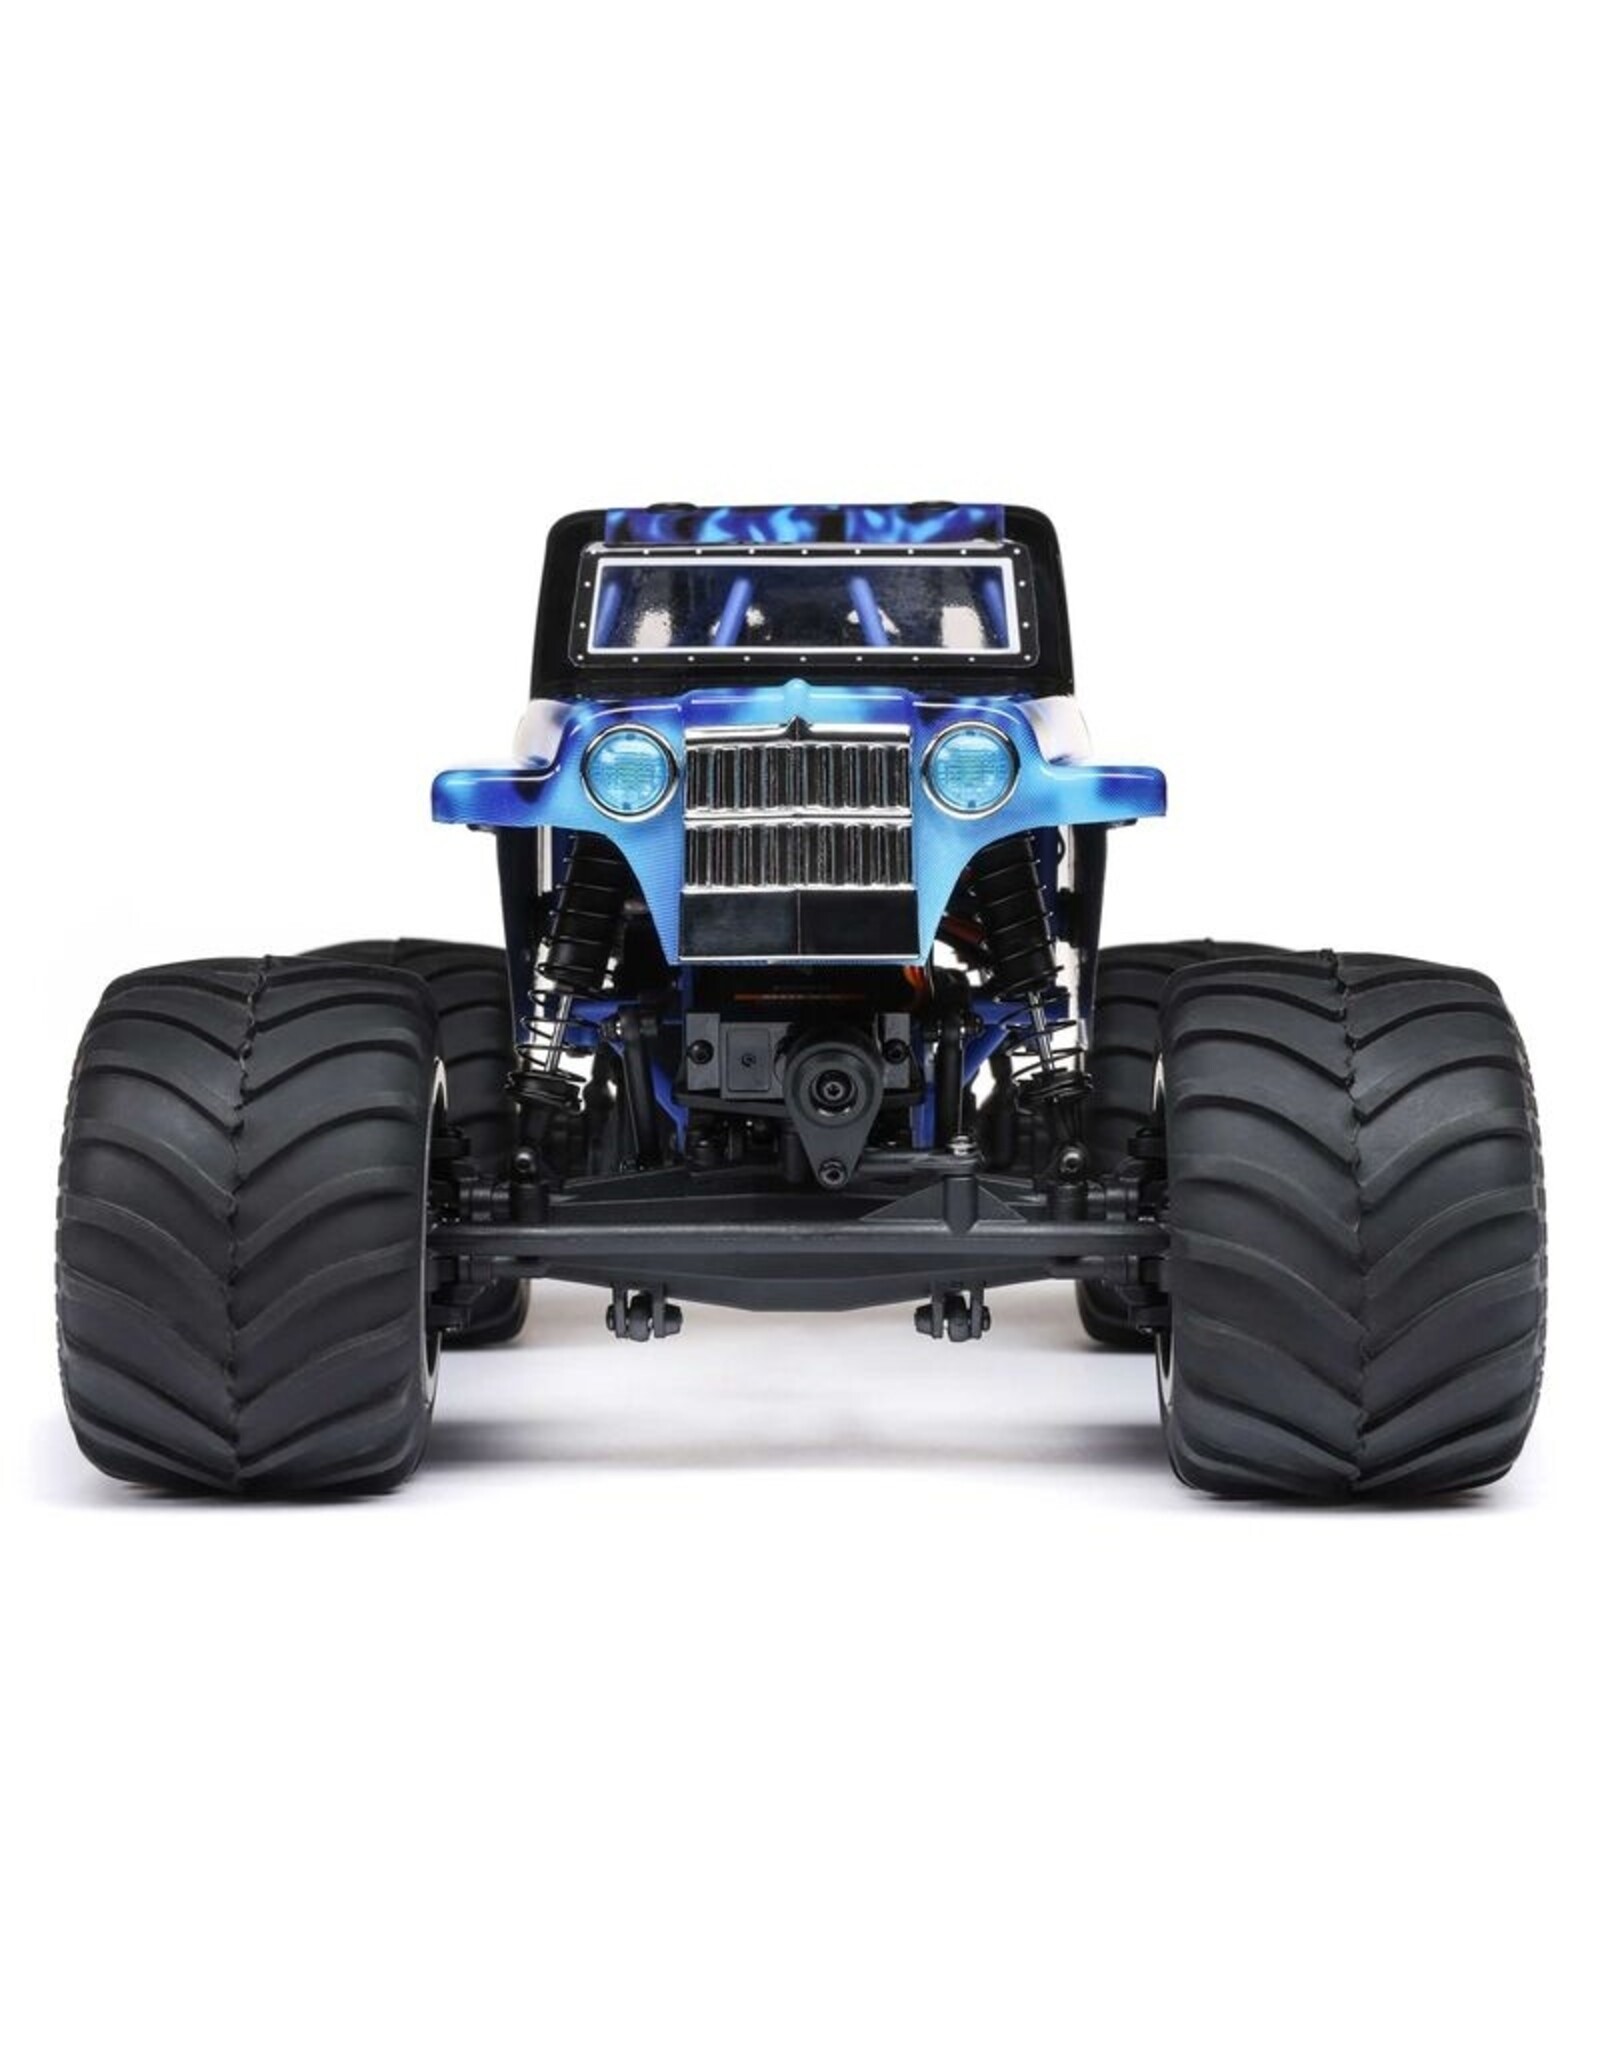 LOS01026T2 1/18 Mini LMT 4WD Son Uva Digger Monster Truck Brushed 